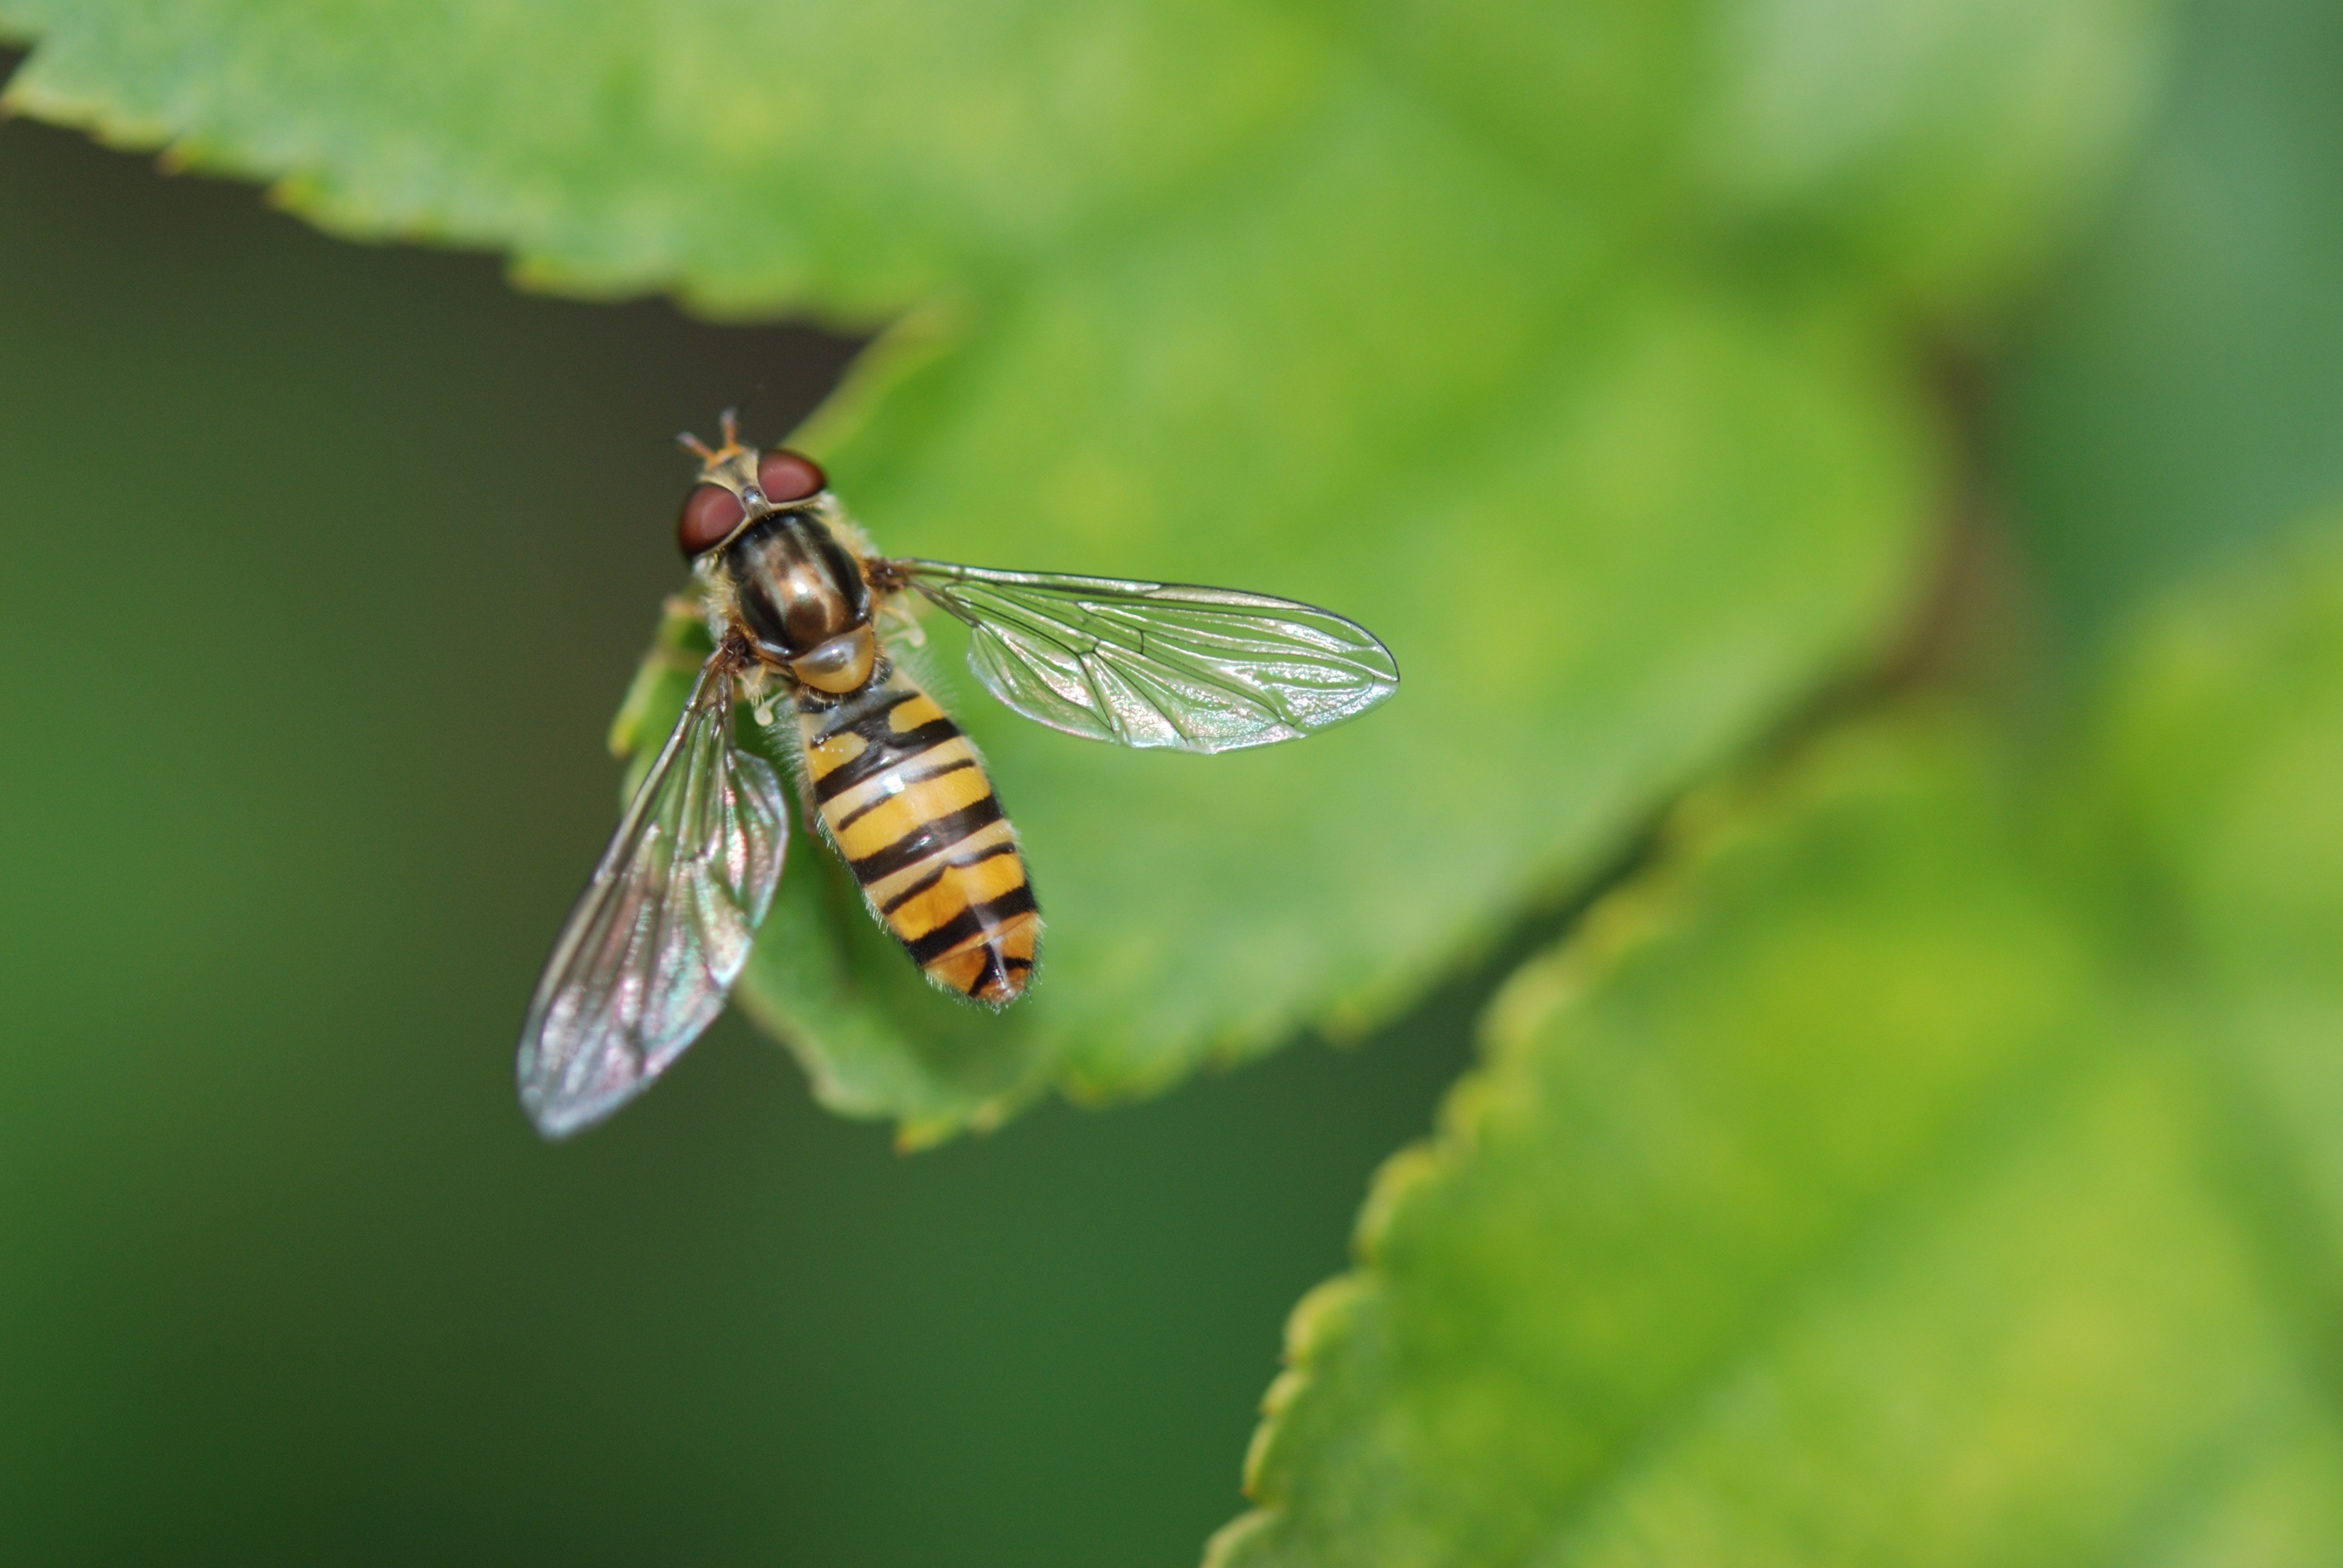 Insect, Animal, Wasp, Nature, Macro, insect, nature